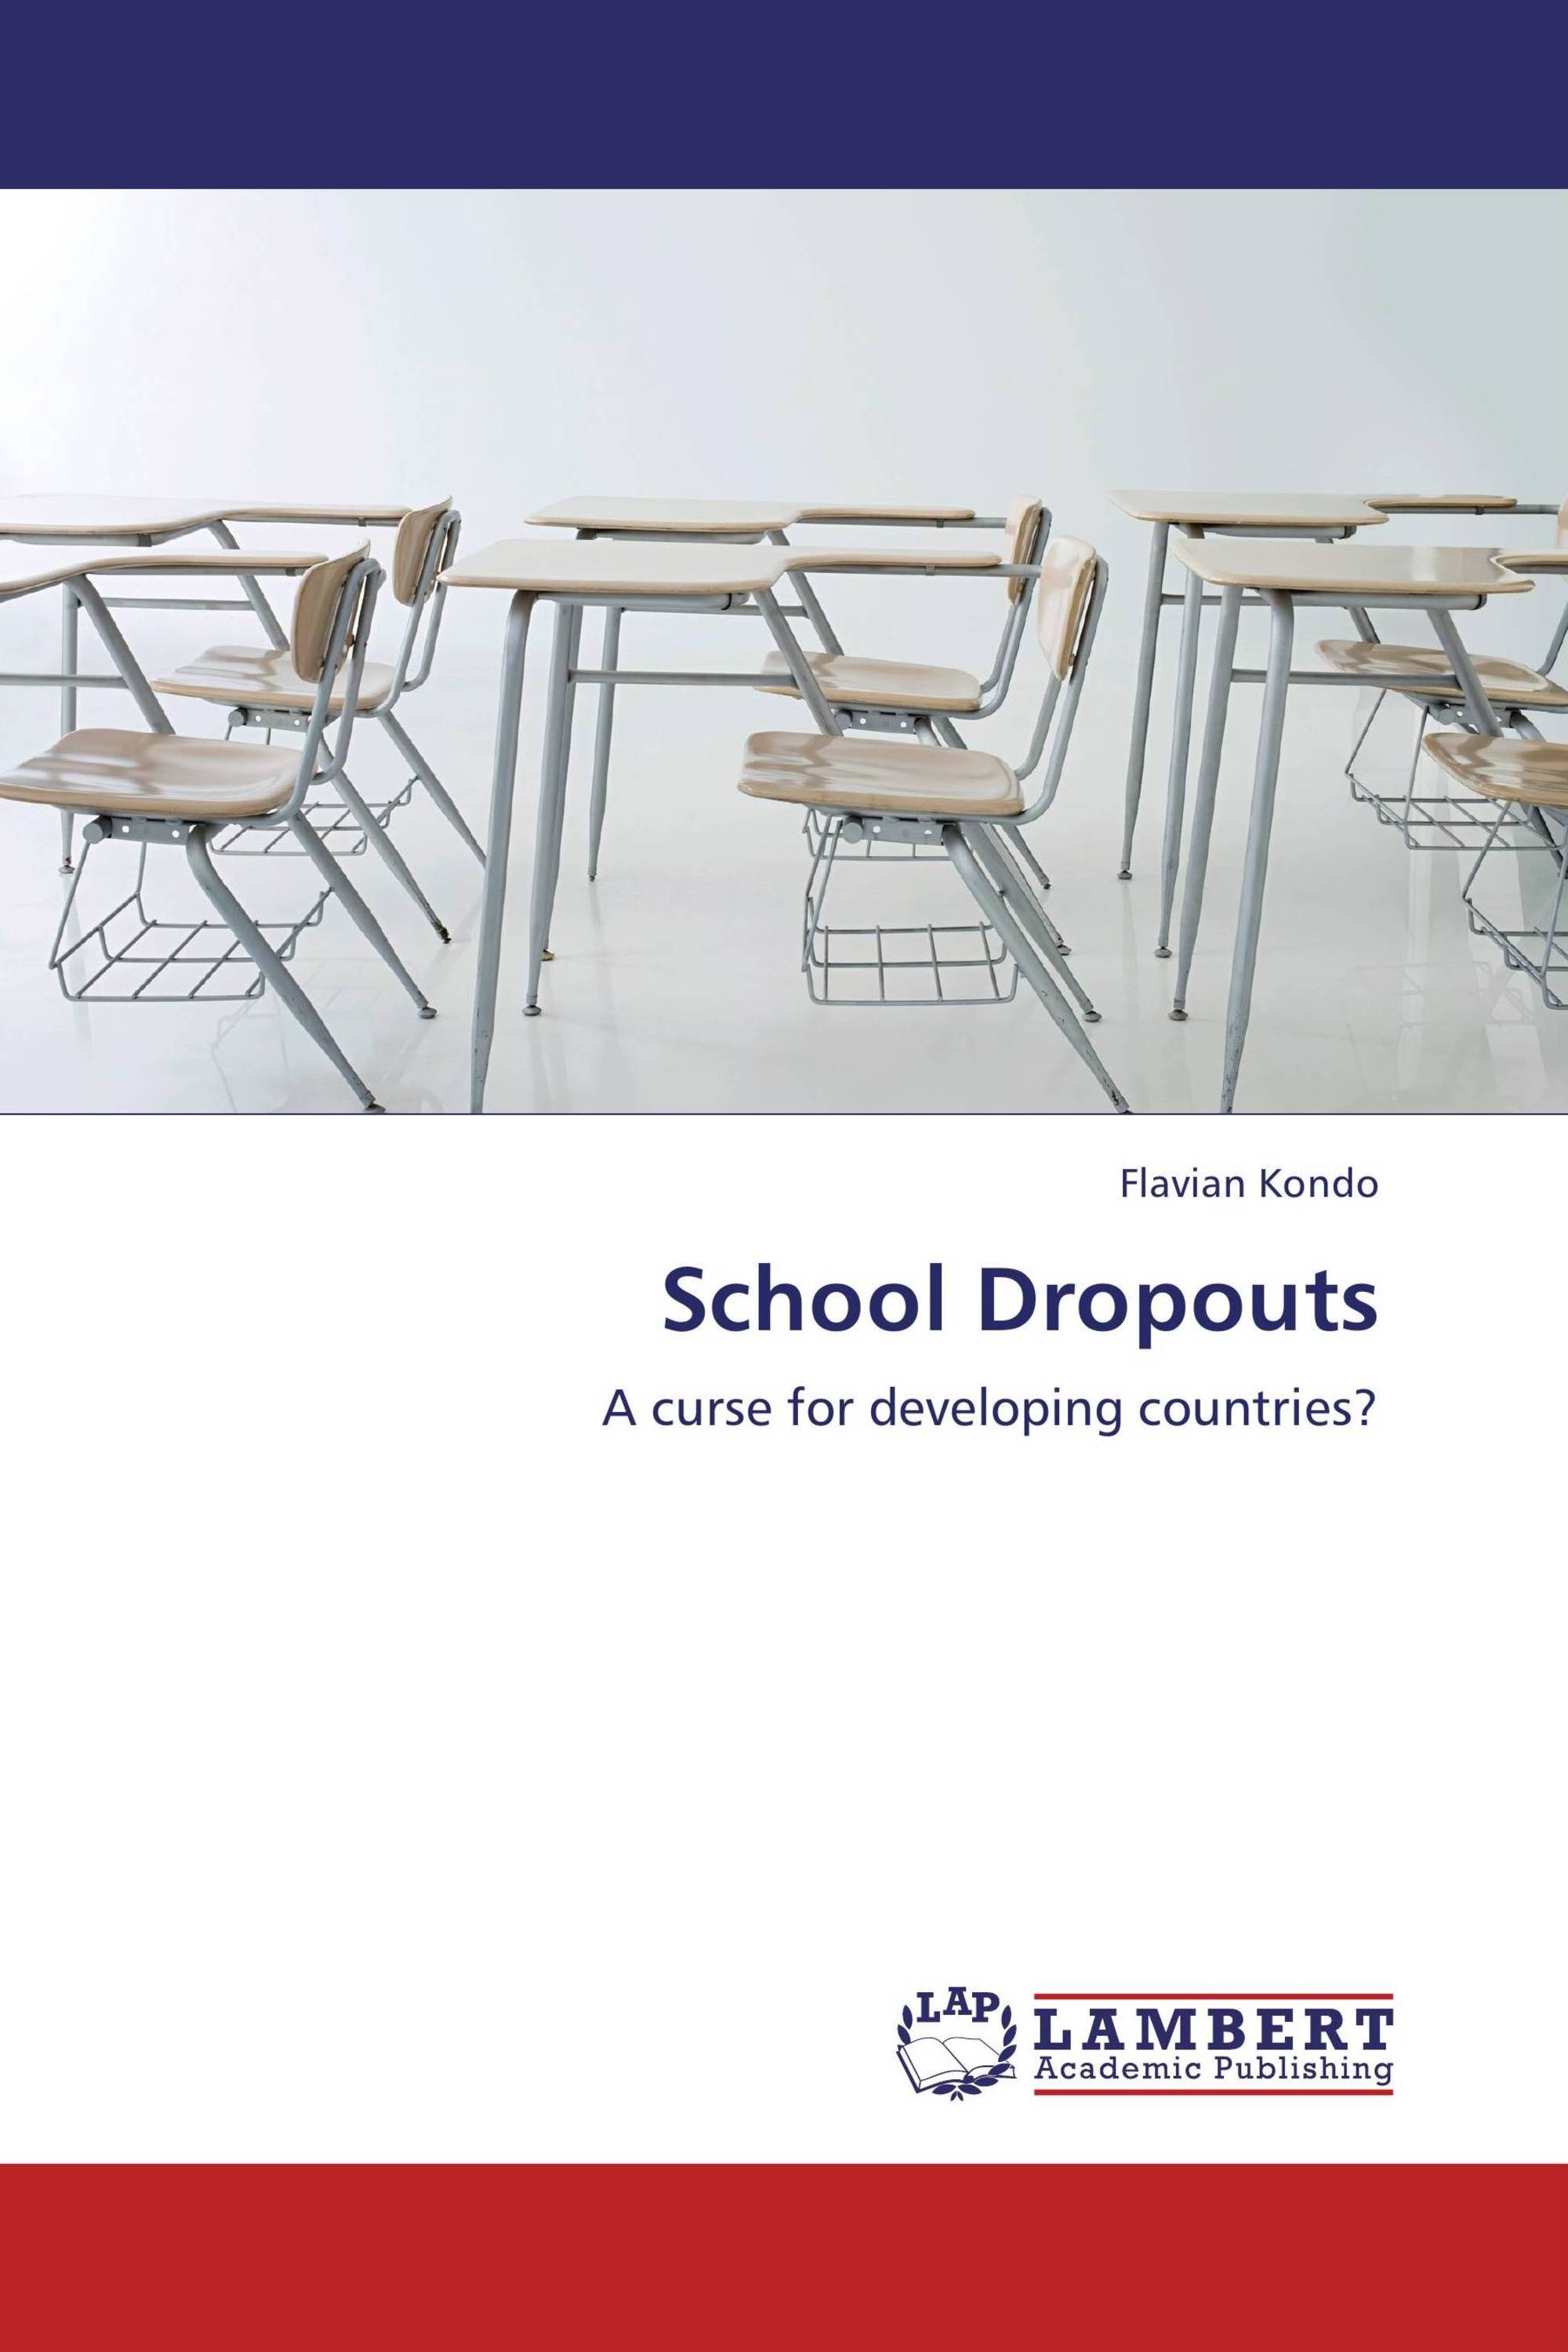 research on school dropouts